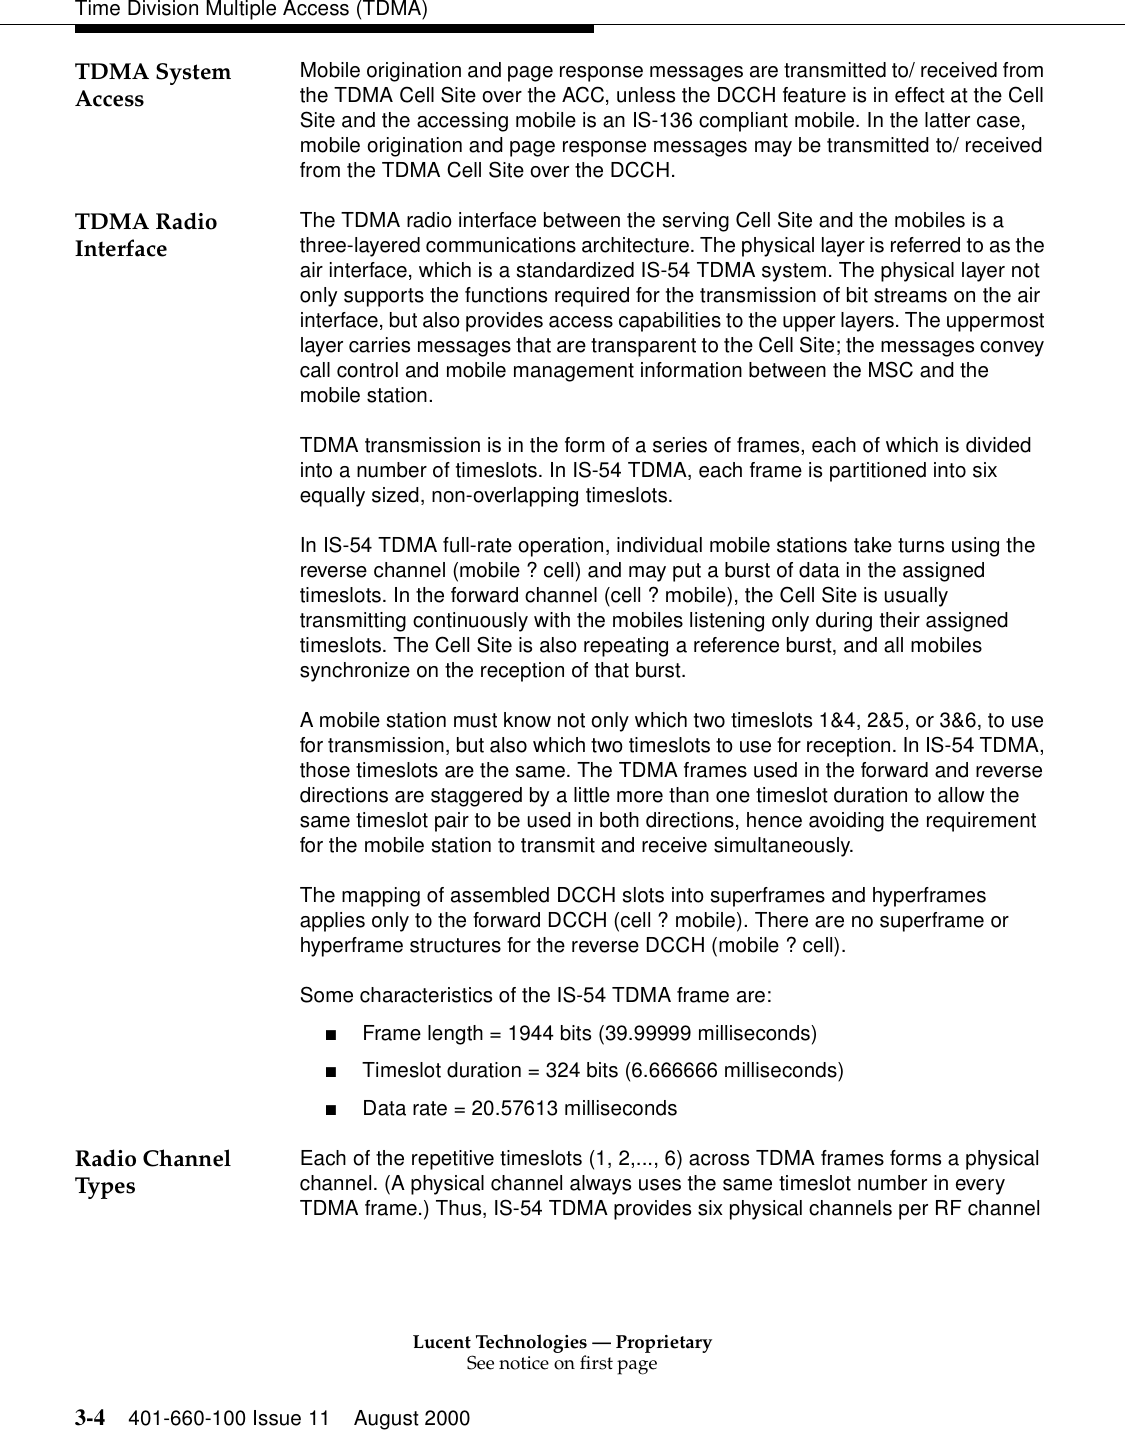 Lucent Technologies — ProprietarySee notice on first page3-4 401-660-100 Issue 11 August 2000Time Division Multiple Access (TDMA)TDMA System Access Mobile origination and page response messages are transmitted to/ received from the TDMA Cell Site over the ACC, unless the DCCH feature is in effect at the Cell Site and the accessing mobile is an IS-136 compliant mobile. In the latter case, mobile origination and page response messages may be transmitted to/ received from the TDMA Cell Site over the DCCH. TDMA Radio Interface The TDMA radio interface between the serving Cell Site and the mobiles is a three-layered communications architecture. The physical layer is referred to as the air interface, which is a standardized IS-54 TDMA system. The physical layer not only supports the functions required for the transmission of bit streams on the air interface, but also provides access capabilities to the upper layers. The uppermost layer carries messages that are transparent to the Cell Site; the messages convey call control and mobile management information between the MSC and the mobile station. TDMA transmission is in the form of a series of frames, each of which is divided into a number of timeslots. In IS-54 TDMA, each frame is partitioned into six equally sized, non-overlapping timeslots. In IS-54 TDMA full-rate operation, individual mobile stations take turns using the reverse channel (mobile ? cell) and may put a burst of data in the assigned timeslots. In the forward channel (cell ? mobile), the Cell Site is usually transmitting continuously with the mobiles listening only during their assigned timeslots. The Cell Site is also repeating a reference burst, and all mobiles synchronize on the reception of that burst. A mobile station must know not only which two timeslots 1&amp;4, 2&amp;5, or 3&amp;6, to use for transmission, but also which two timeslots to use for reception. In IS-54 TDMA, those timeslots are the same. The TDMA frames used in the forward and reverse directions are staggered by a little more than one timeslot duration to allow the same timeslot pair to be used in both directions, hence avoiding the requirement for the mobile station to transmit and receive simultaneously. The mapping of assembled DCCH slots into superframes and hyperframes applies only to the forward DCCH (cell ? mobile). There are no superframe or hyperframe structures for the reverse DCCH (mobile ? cell). Some characteristics of the IS-54 TDMA frame are: ■Frame length = 1944 bits (39.99999 milliseconds) ■Timeslot duration = 324 bits (6.666666 milliseconds) ■Data rate = 20.57613 milliseconds Radio Channel Types Each of the repetitive timeslots (1, 2,..., 6) across TDMA frames forms a physical channel. (A physical channel always uses the same timeslot number in every TDMA frame.) Thus, IS-54 TDMA provides six physical channels per RF channel 